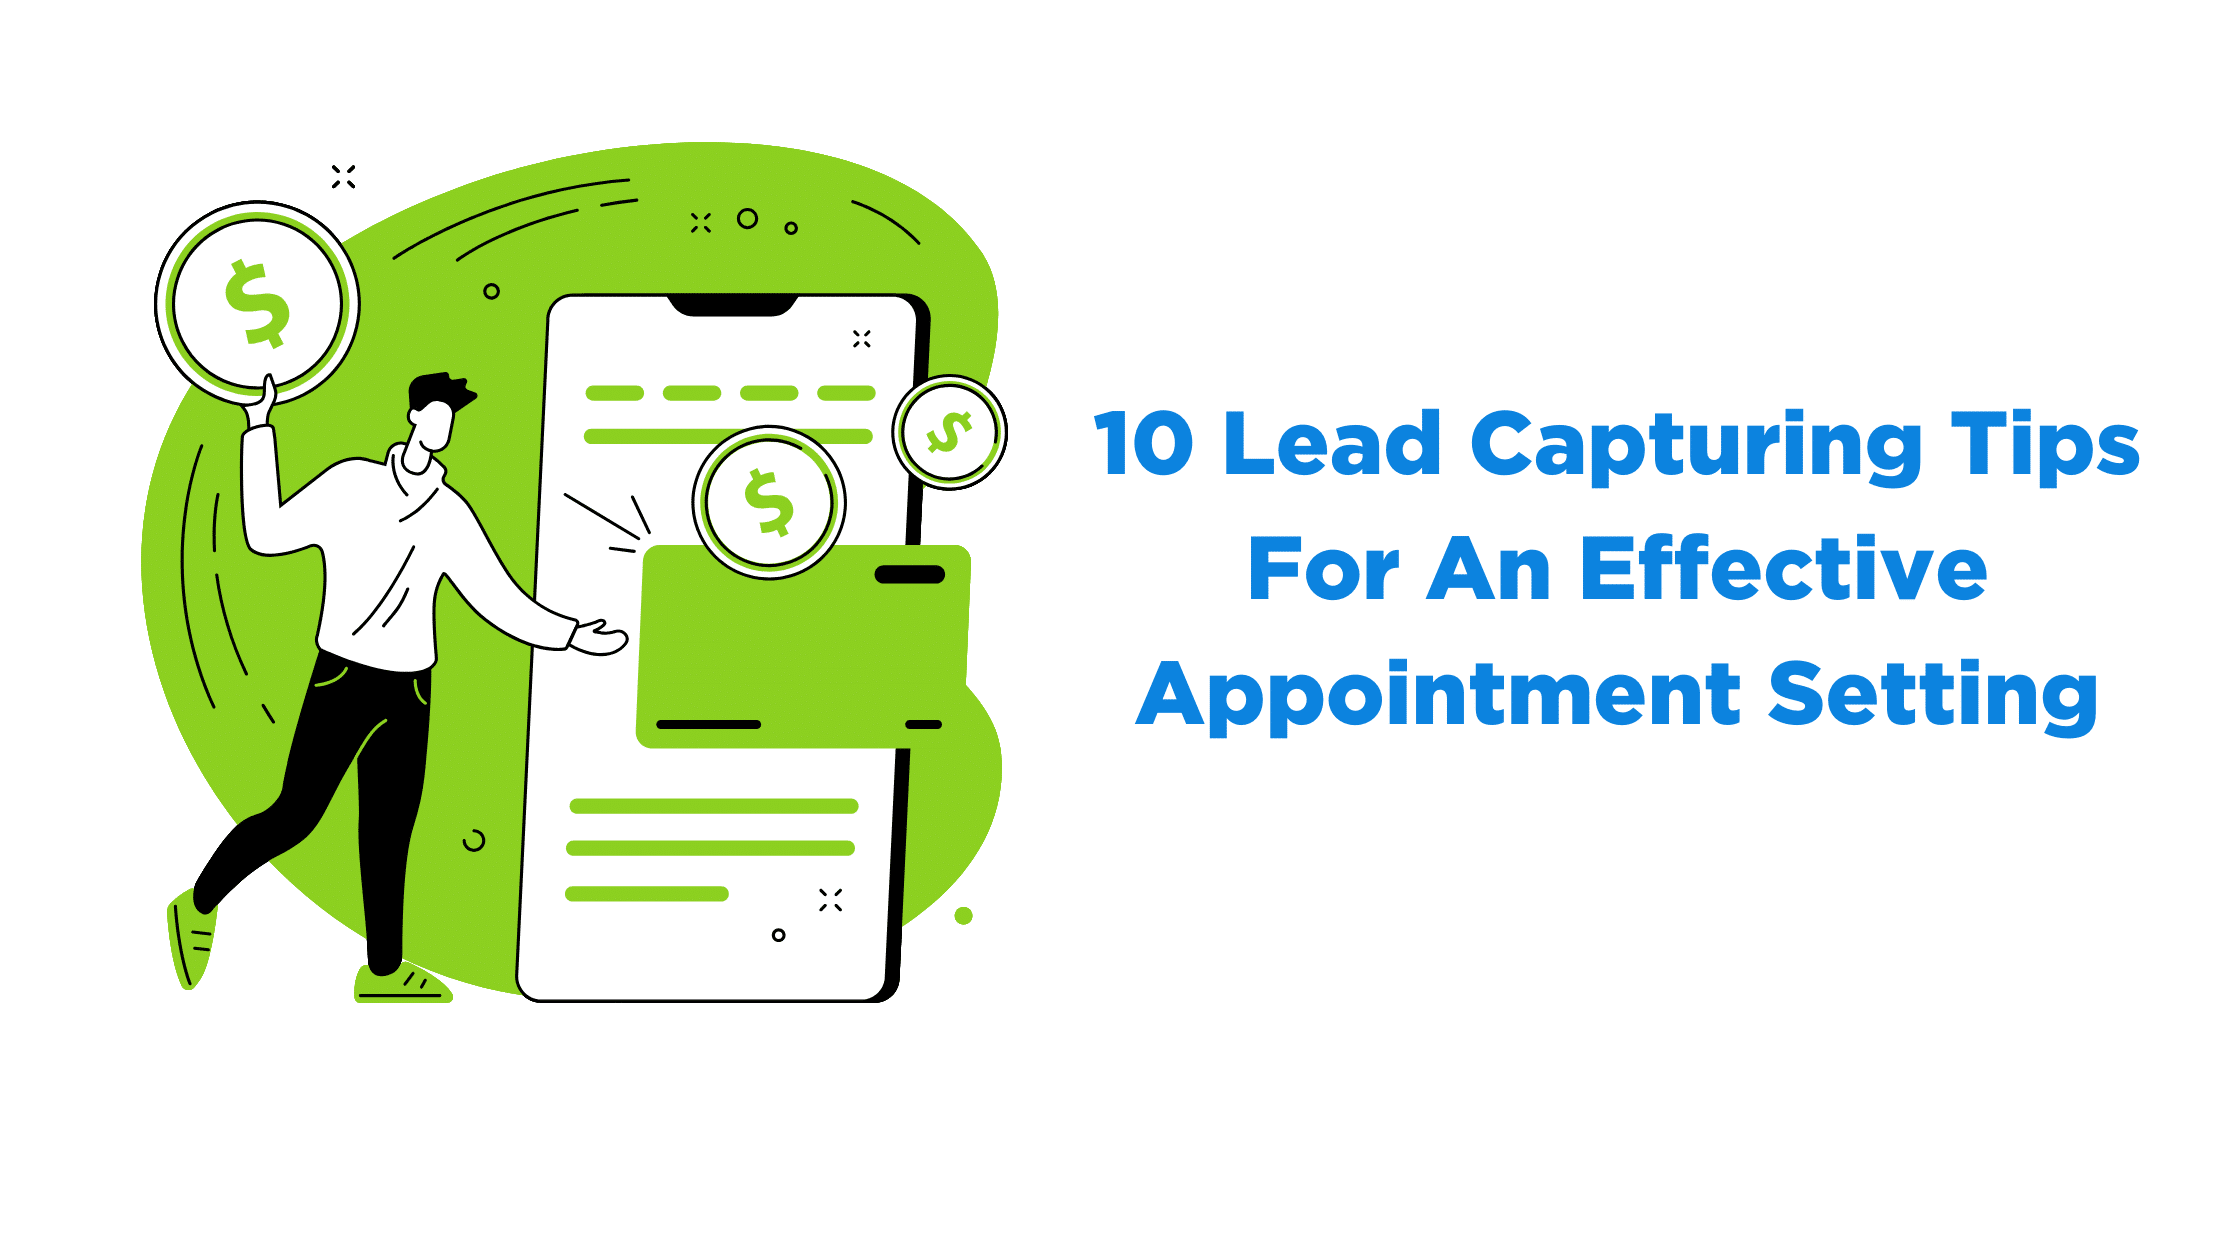 10 Lead Capturing Tips For An Effective Appointment Setting